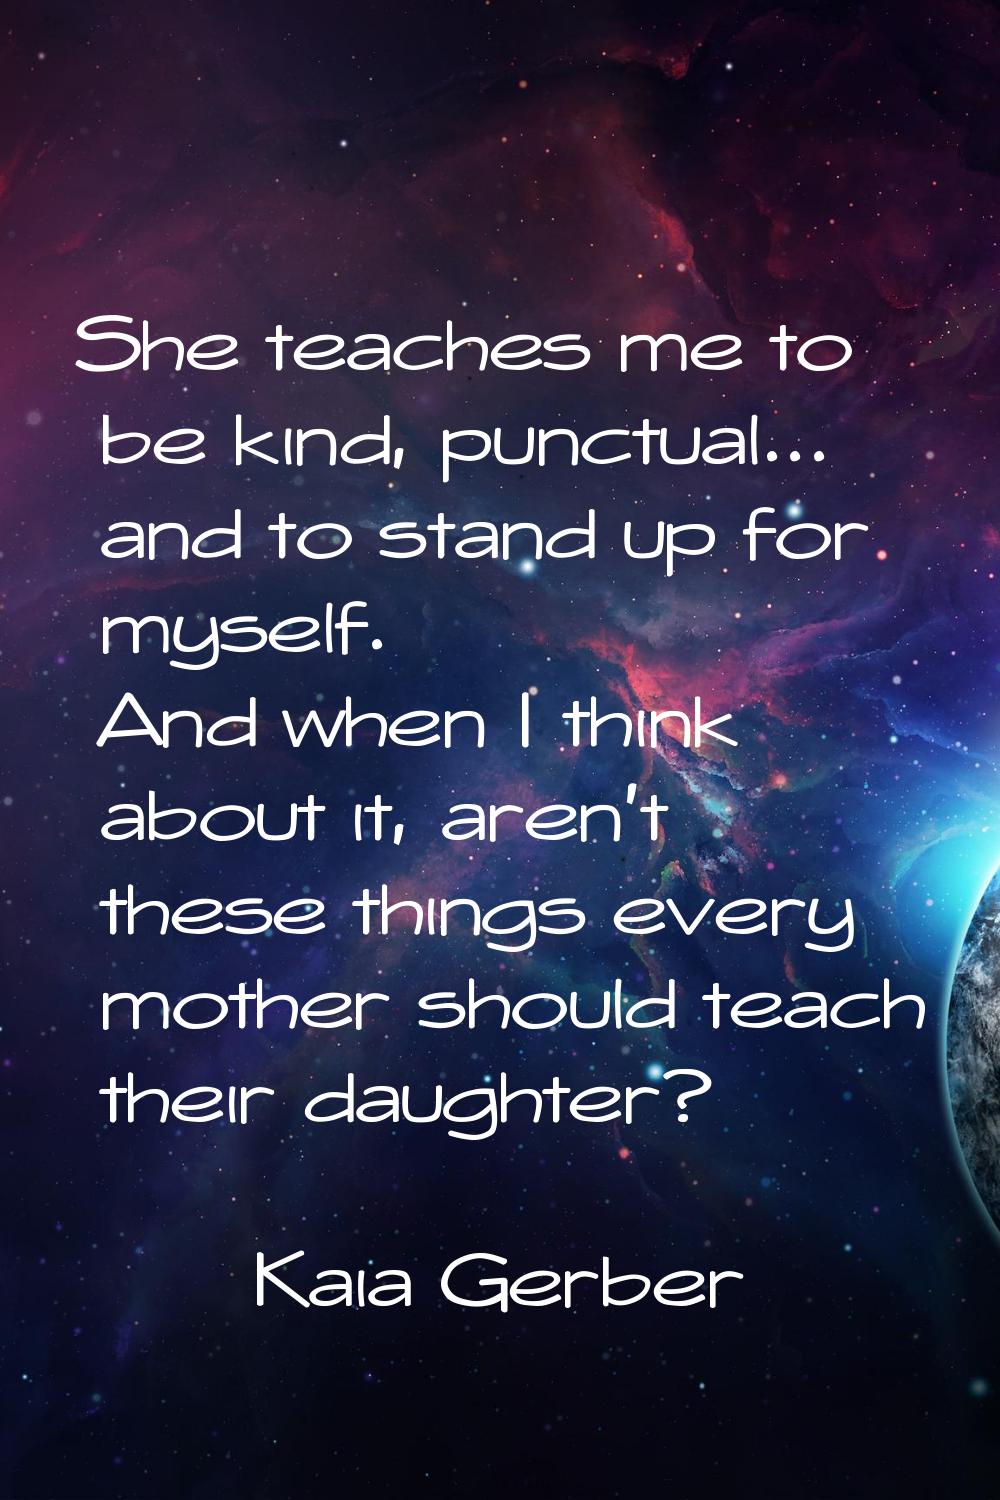 She teaches me to be kind, punctual... and to stand up for myself. And when I think about it, aren'